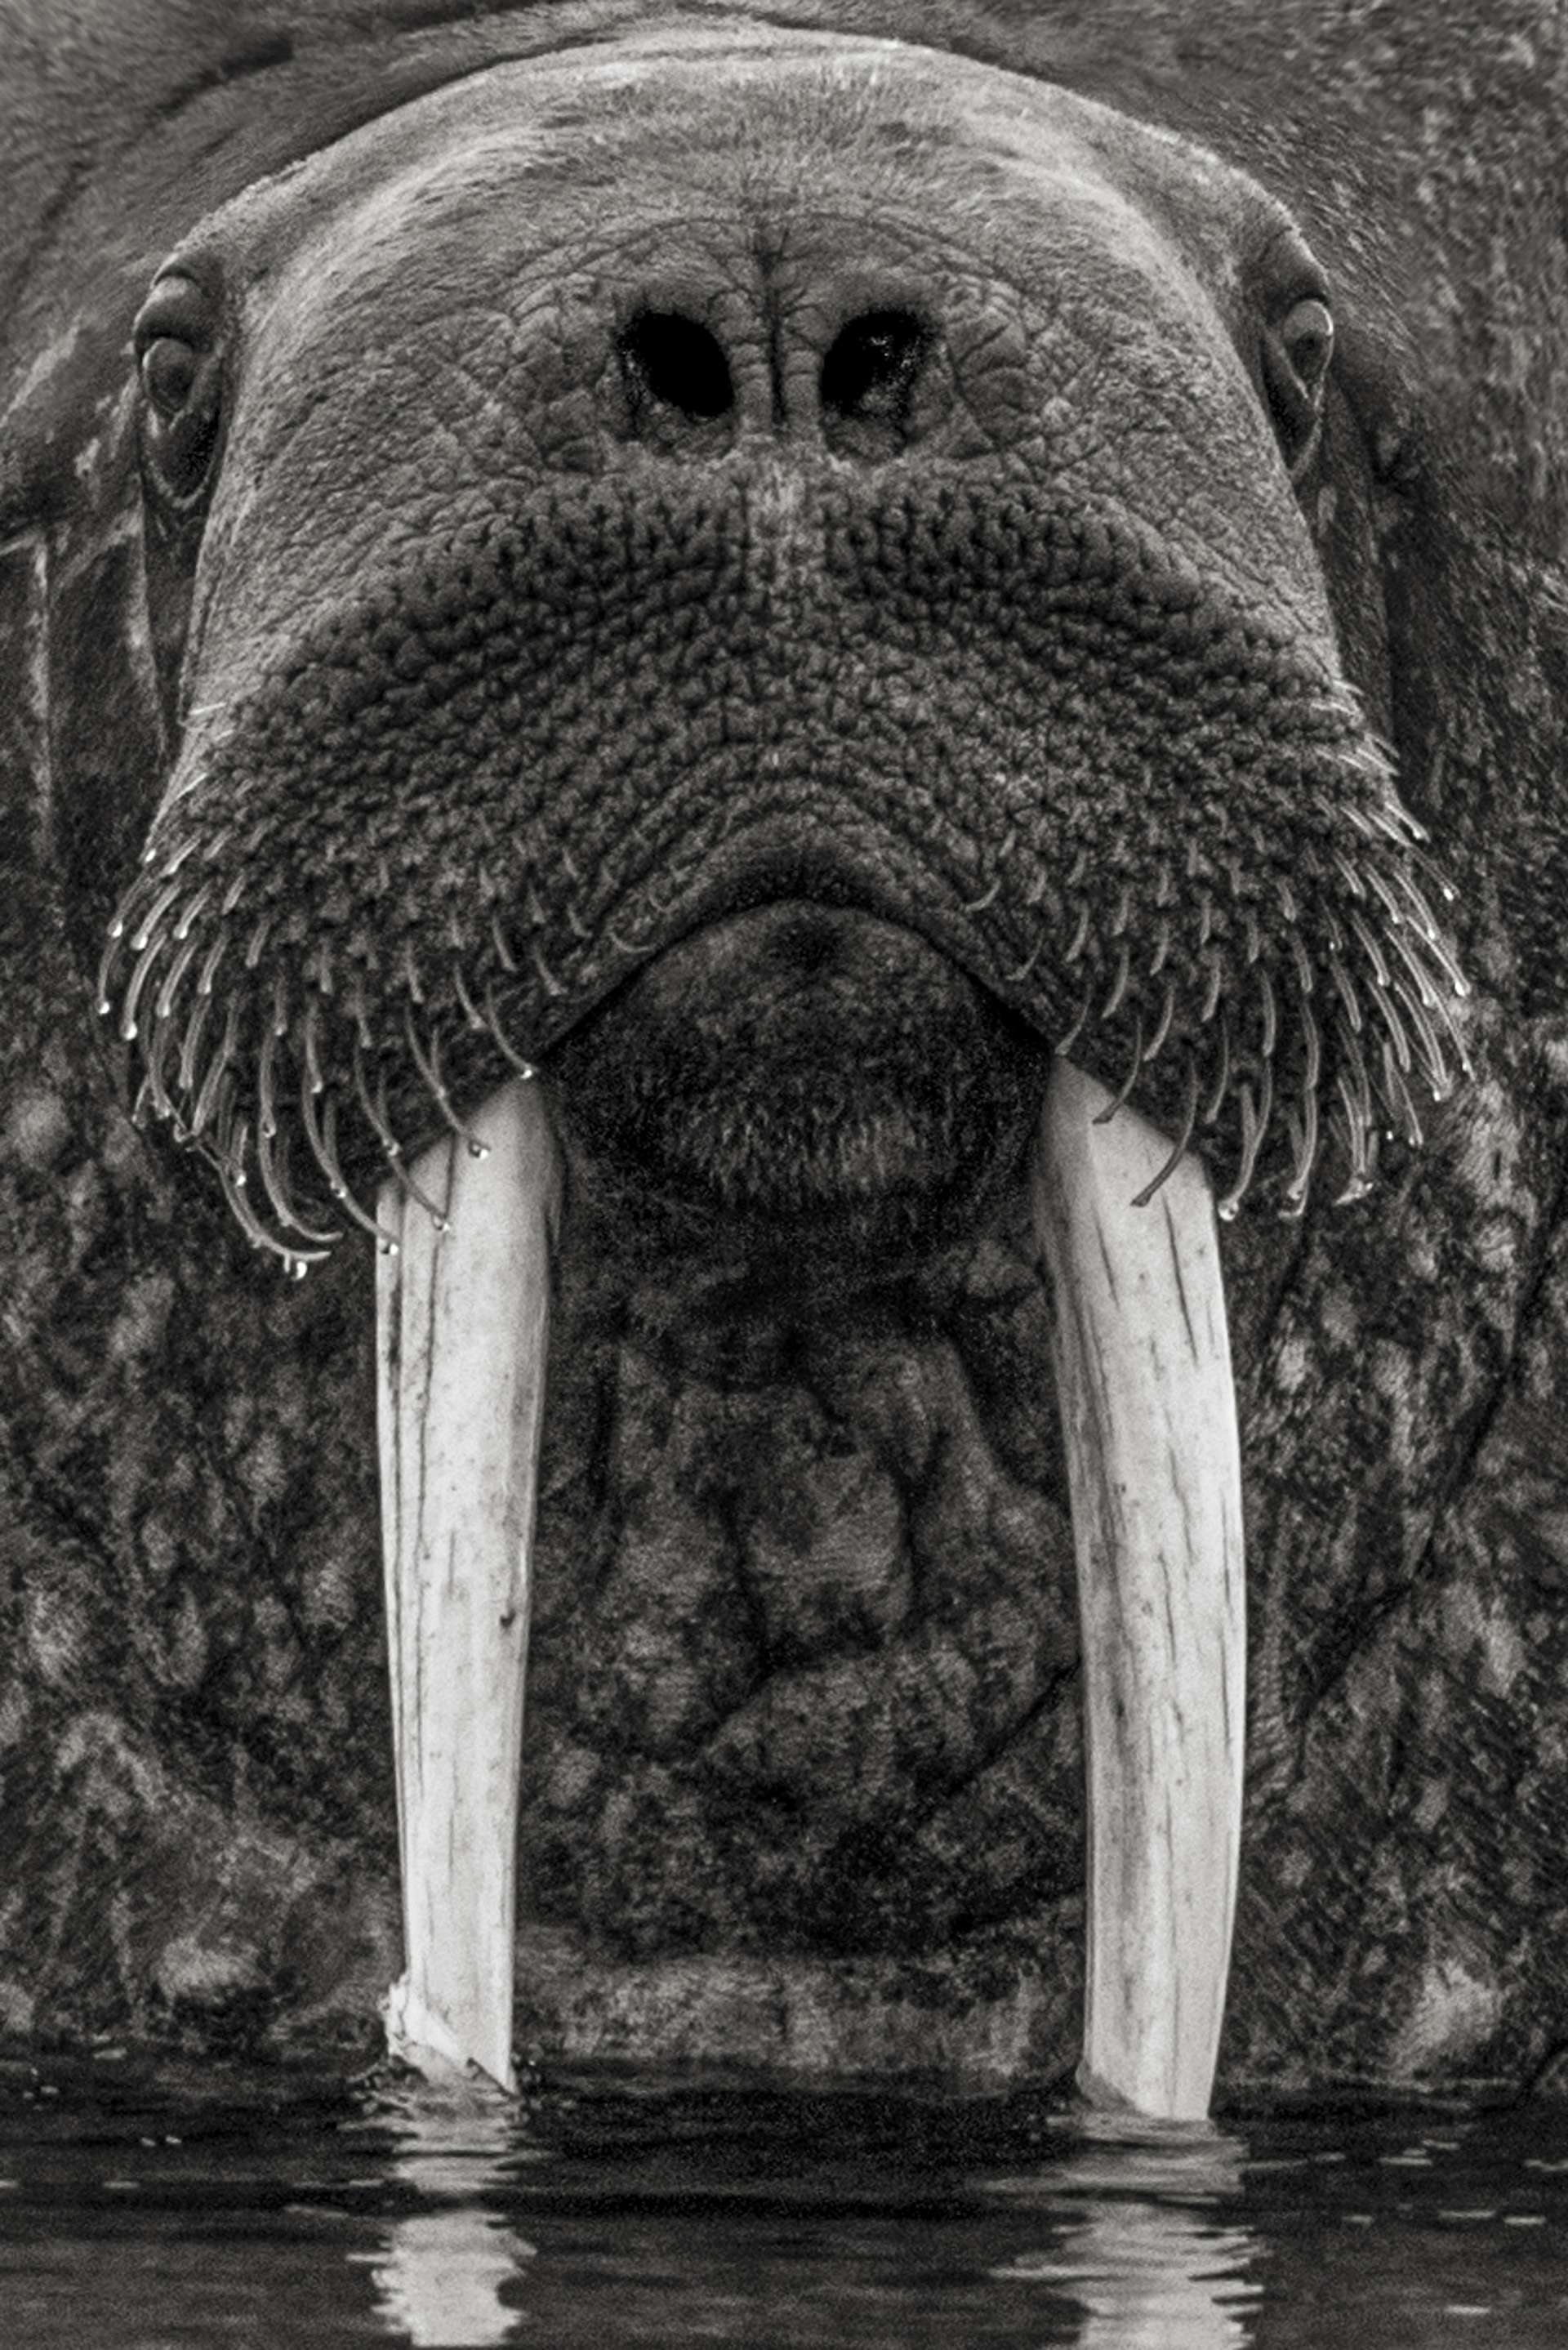 Gilles Martin's photograph : walrus from Svalbard, Struggle for life